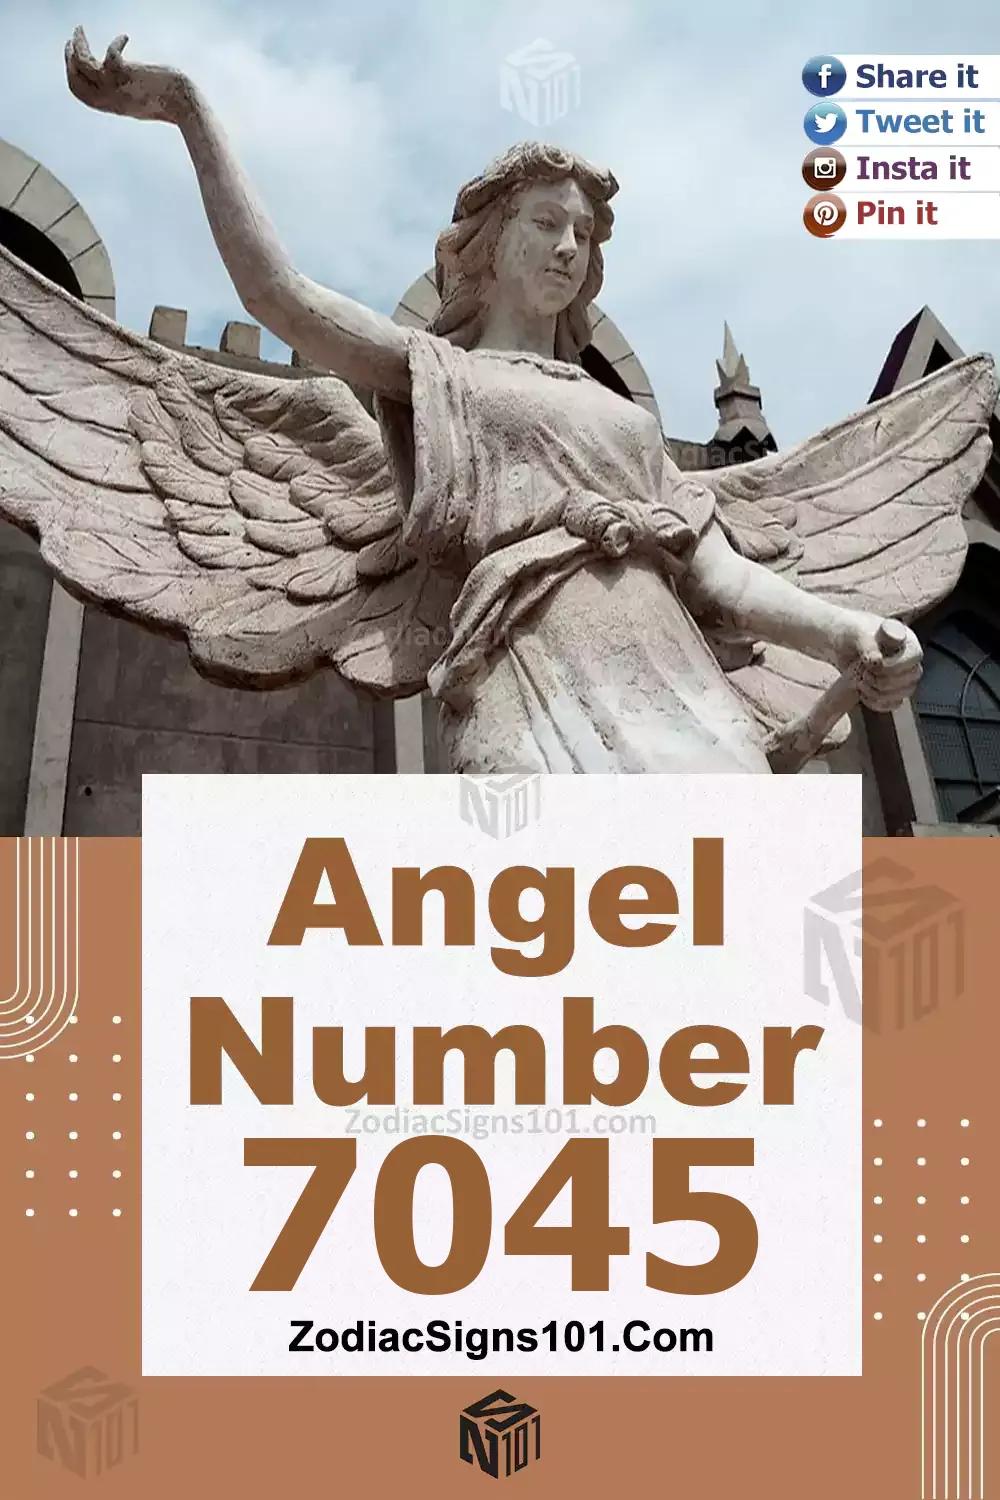 7045 Angel Number Meaning